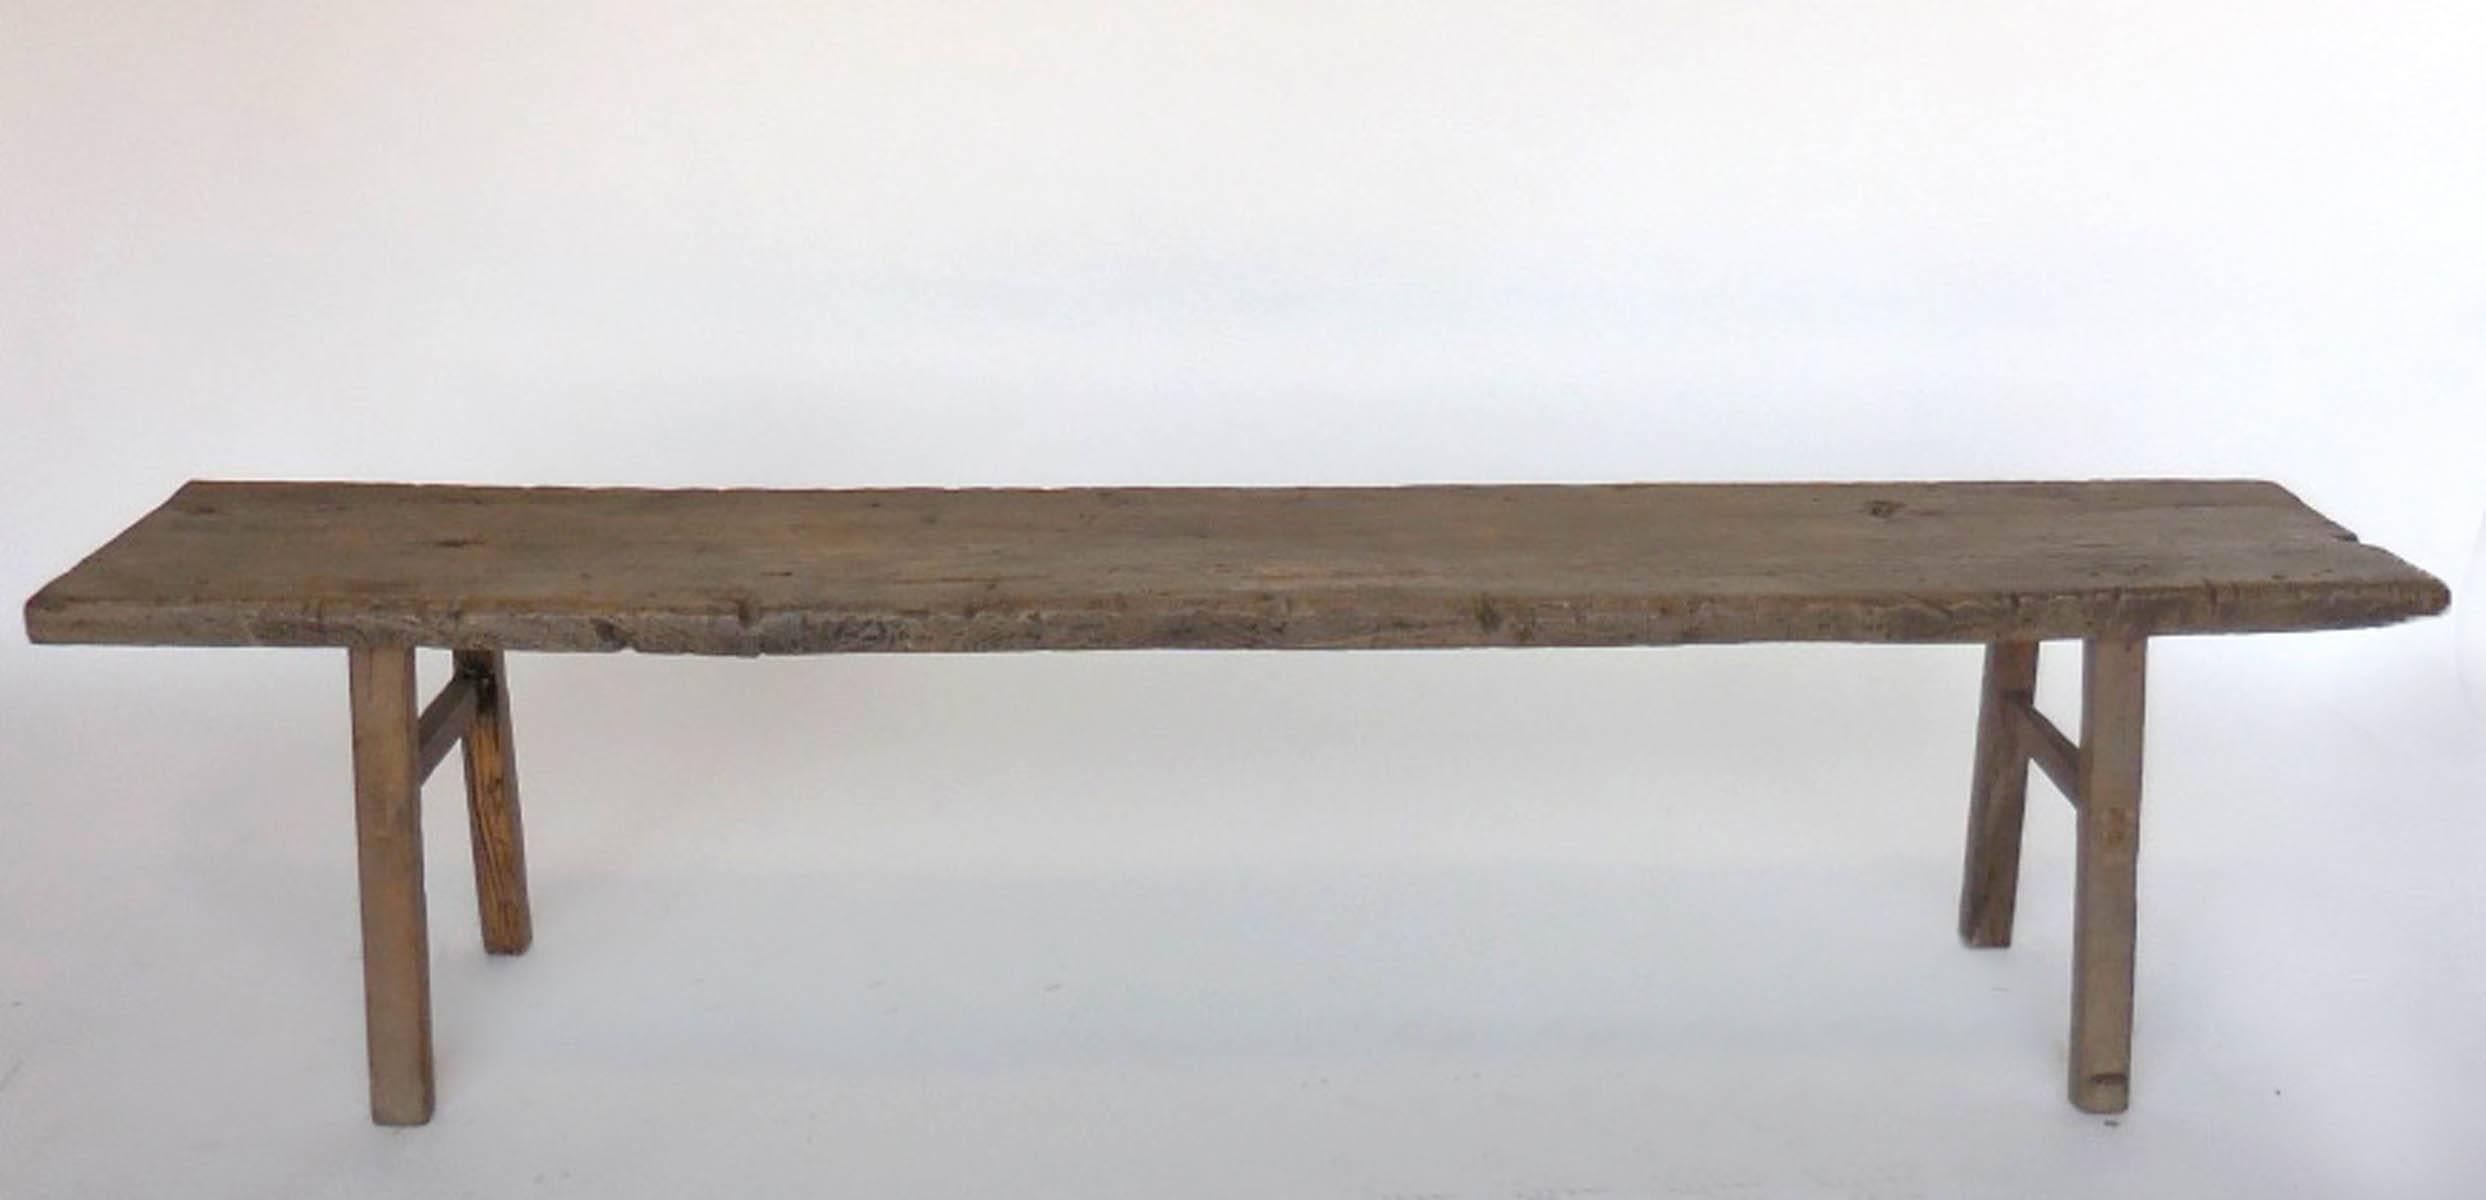 19th century Japanese carpenter's bench. Great simple look, smooth natural patina, clean lines, old cut use marks visible but worn down and smooth.